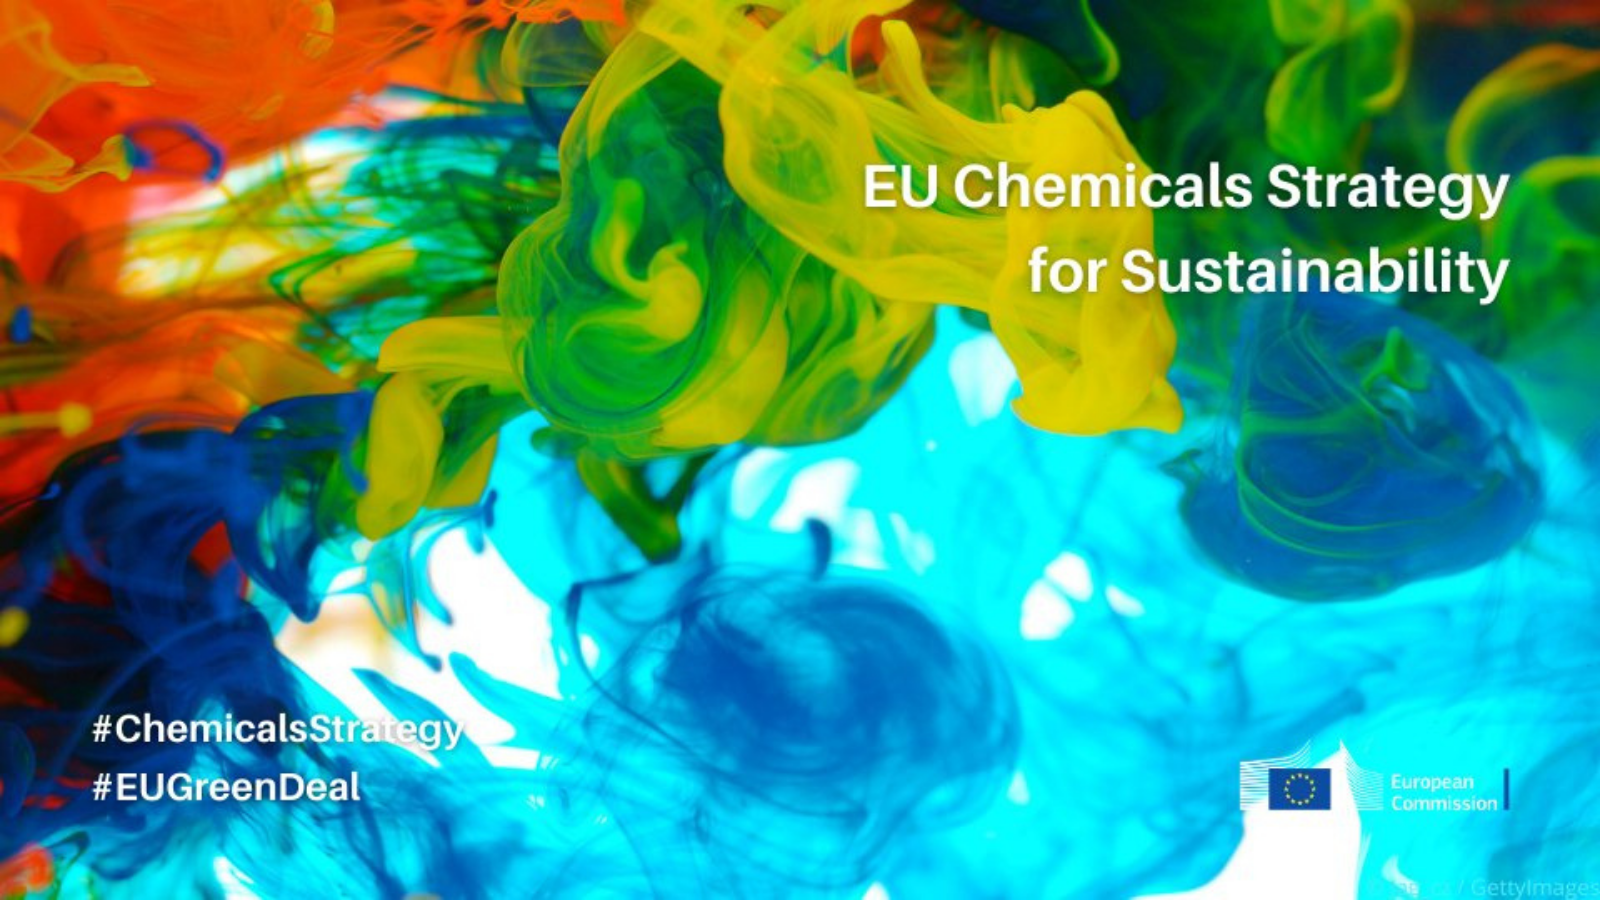 Ready to engage in strategic dialogue for sustainable chemicals production